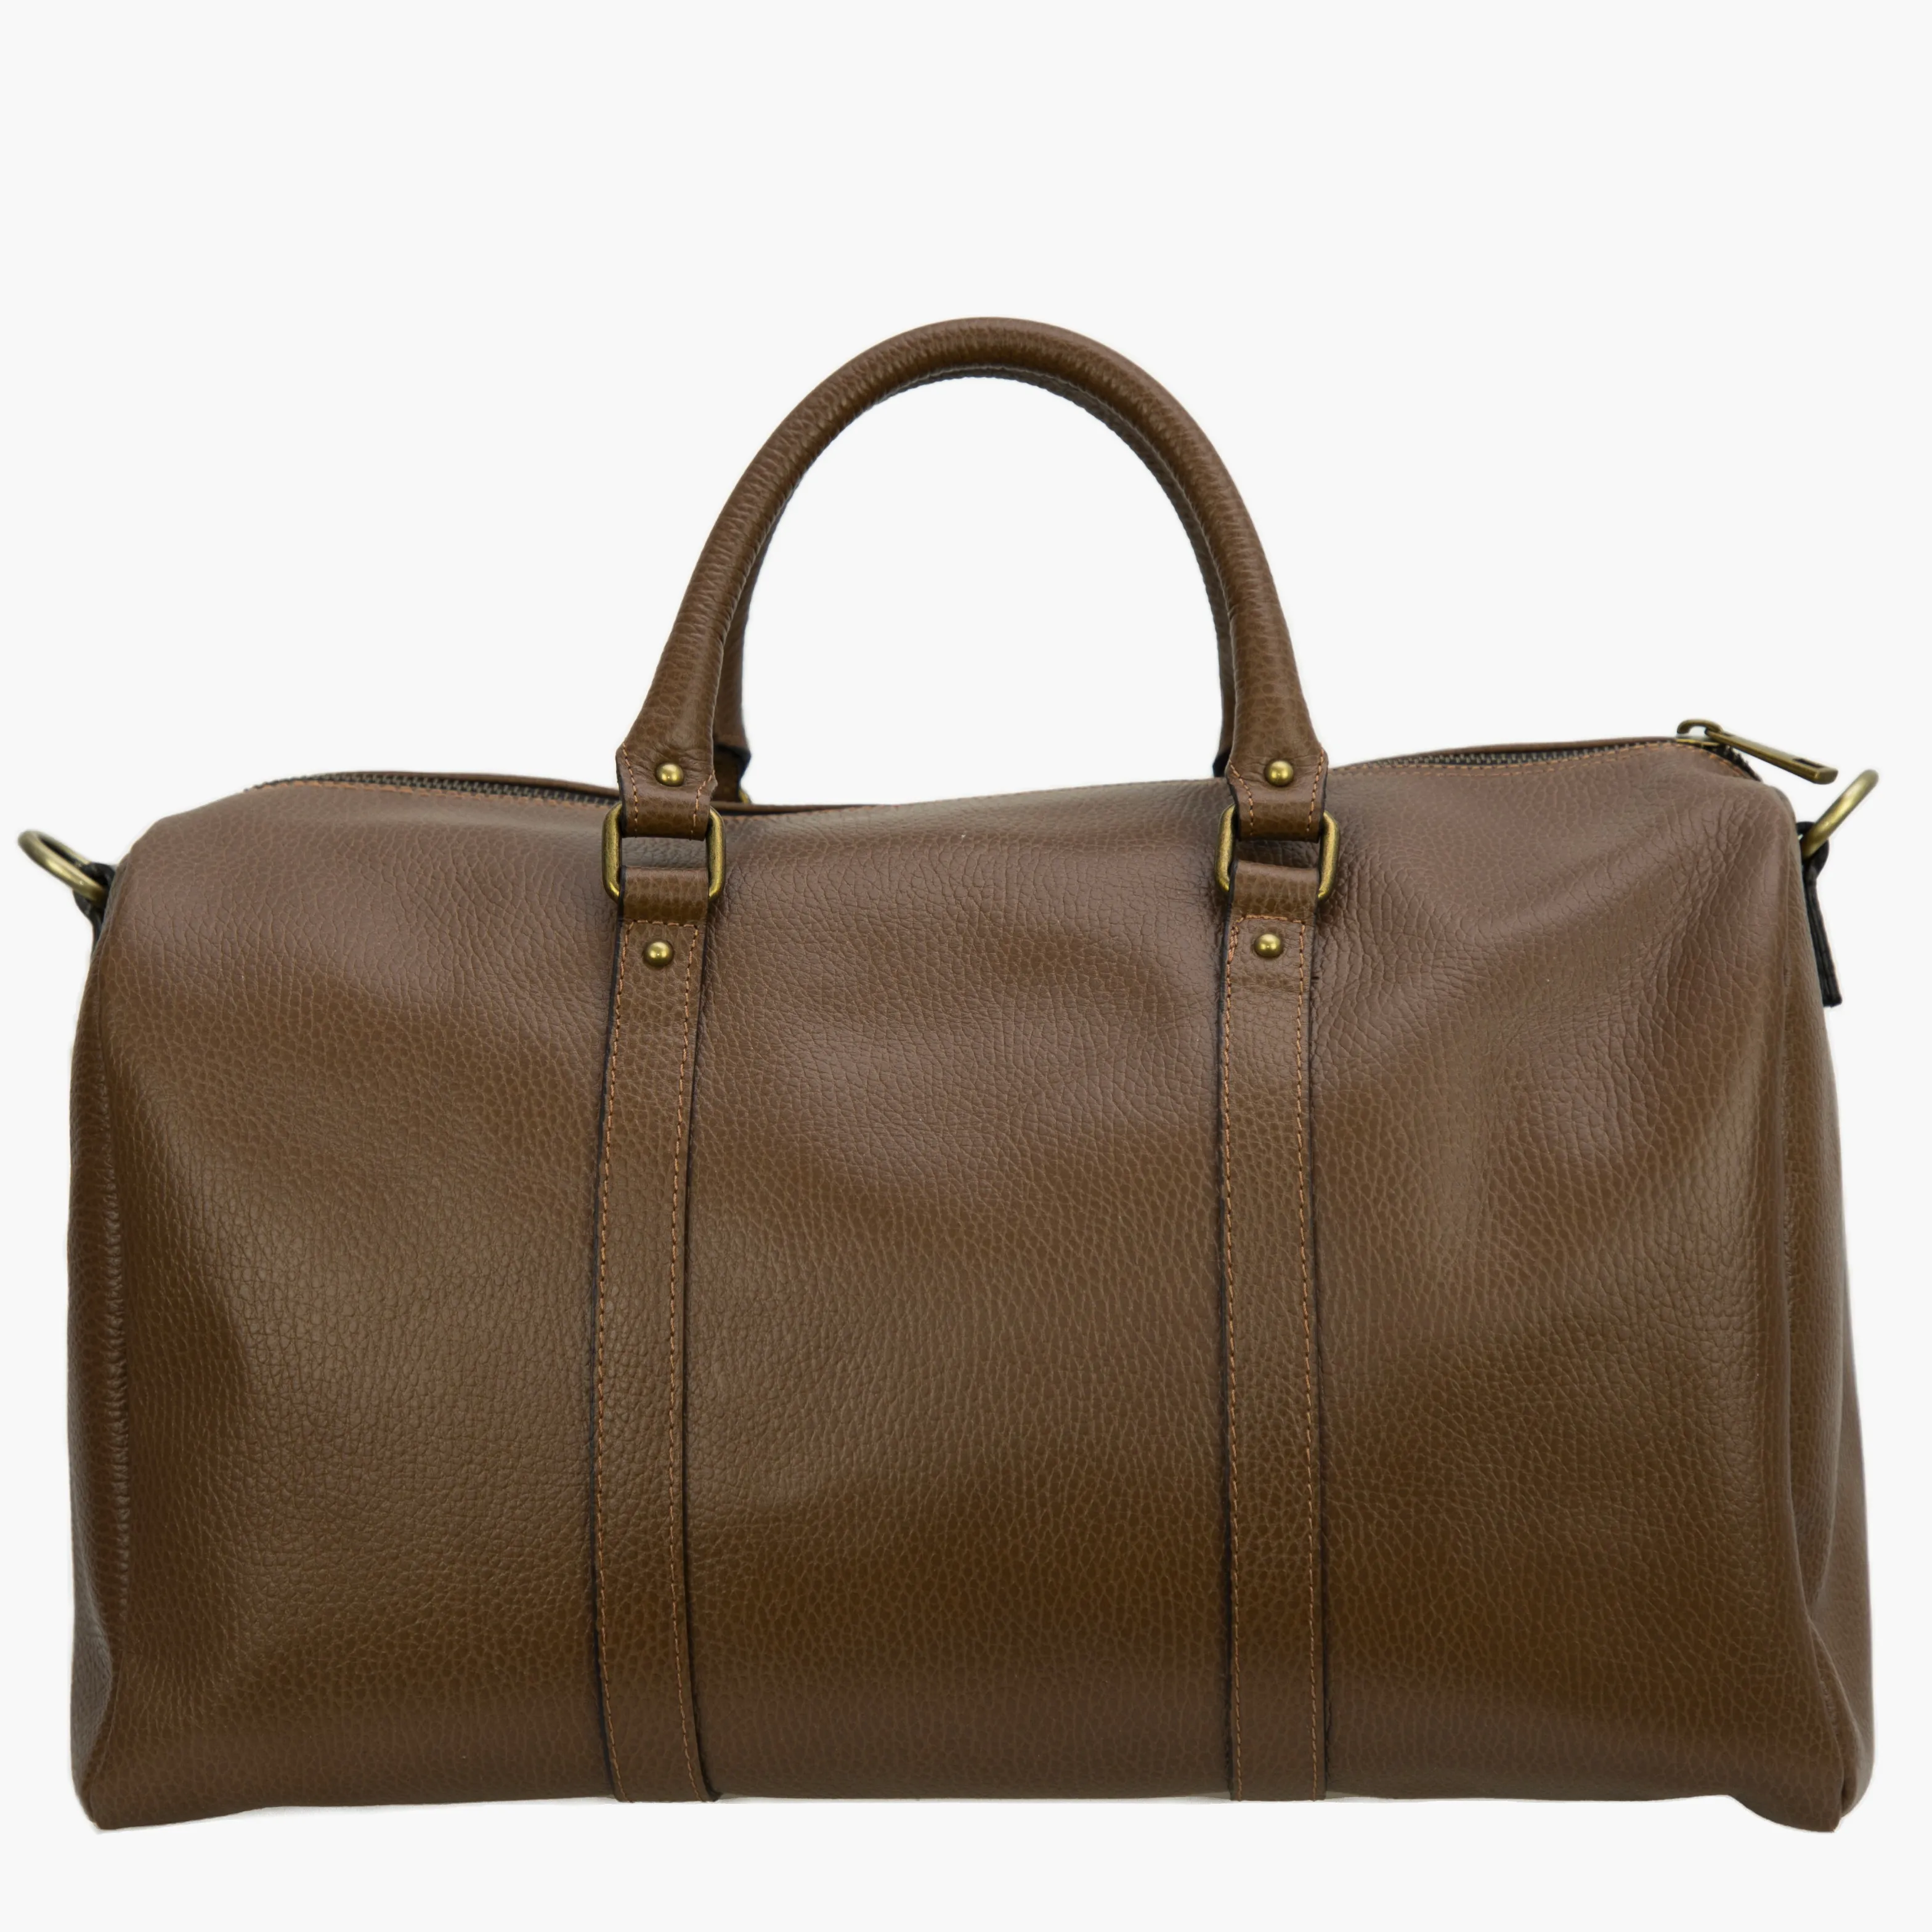 Top Quality genuine leather Travel Bag for men Italian genuine leather bags Made in Italy Manufacturers